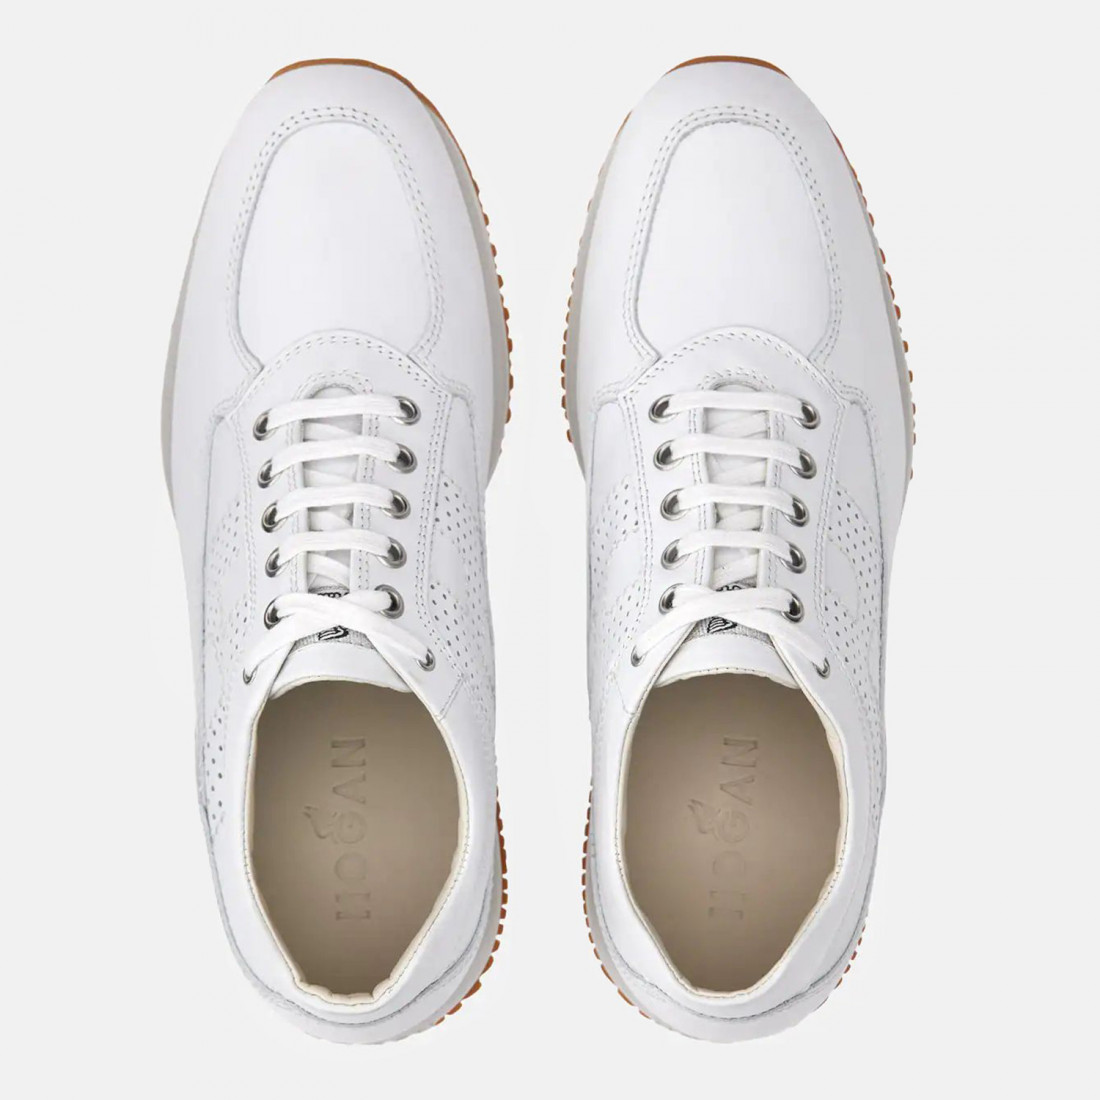 Women's Hogan Interactive sneakers in white leather